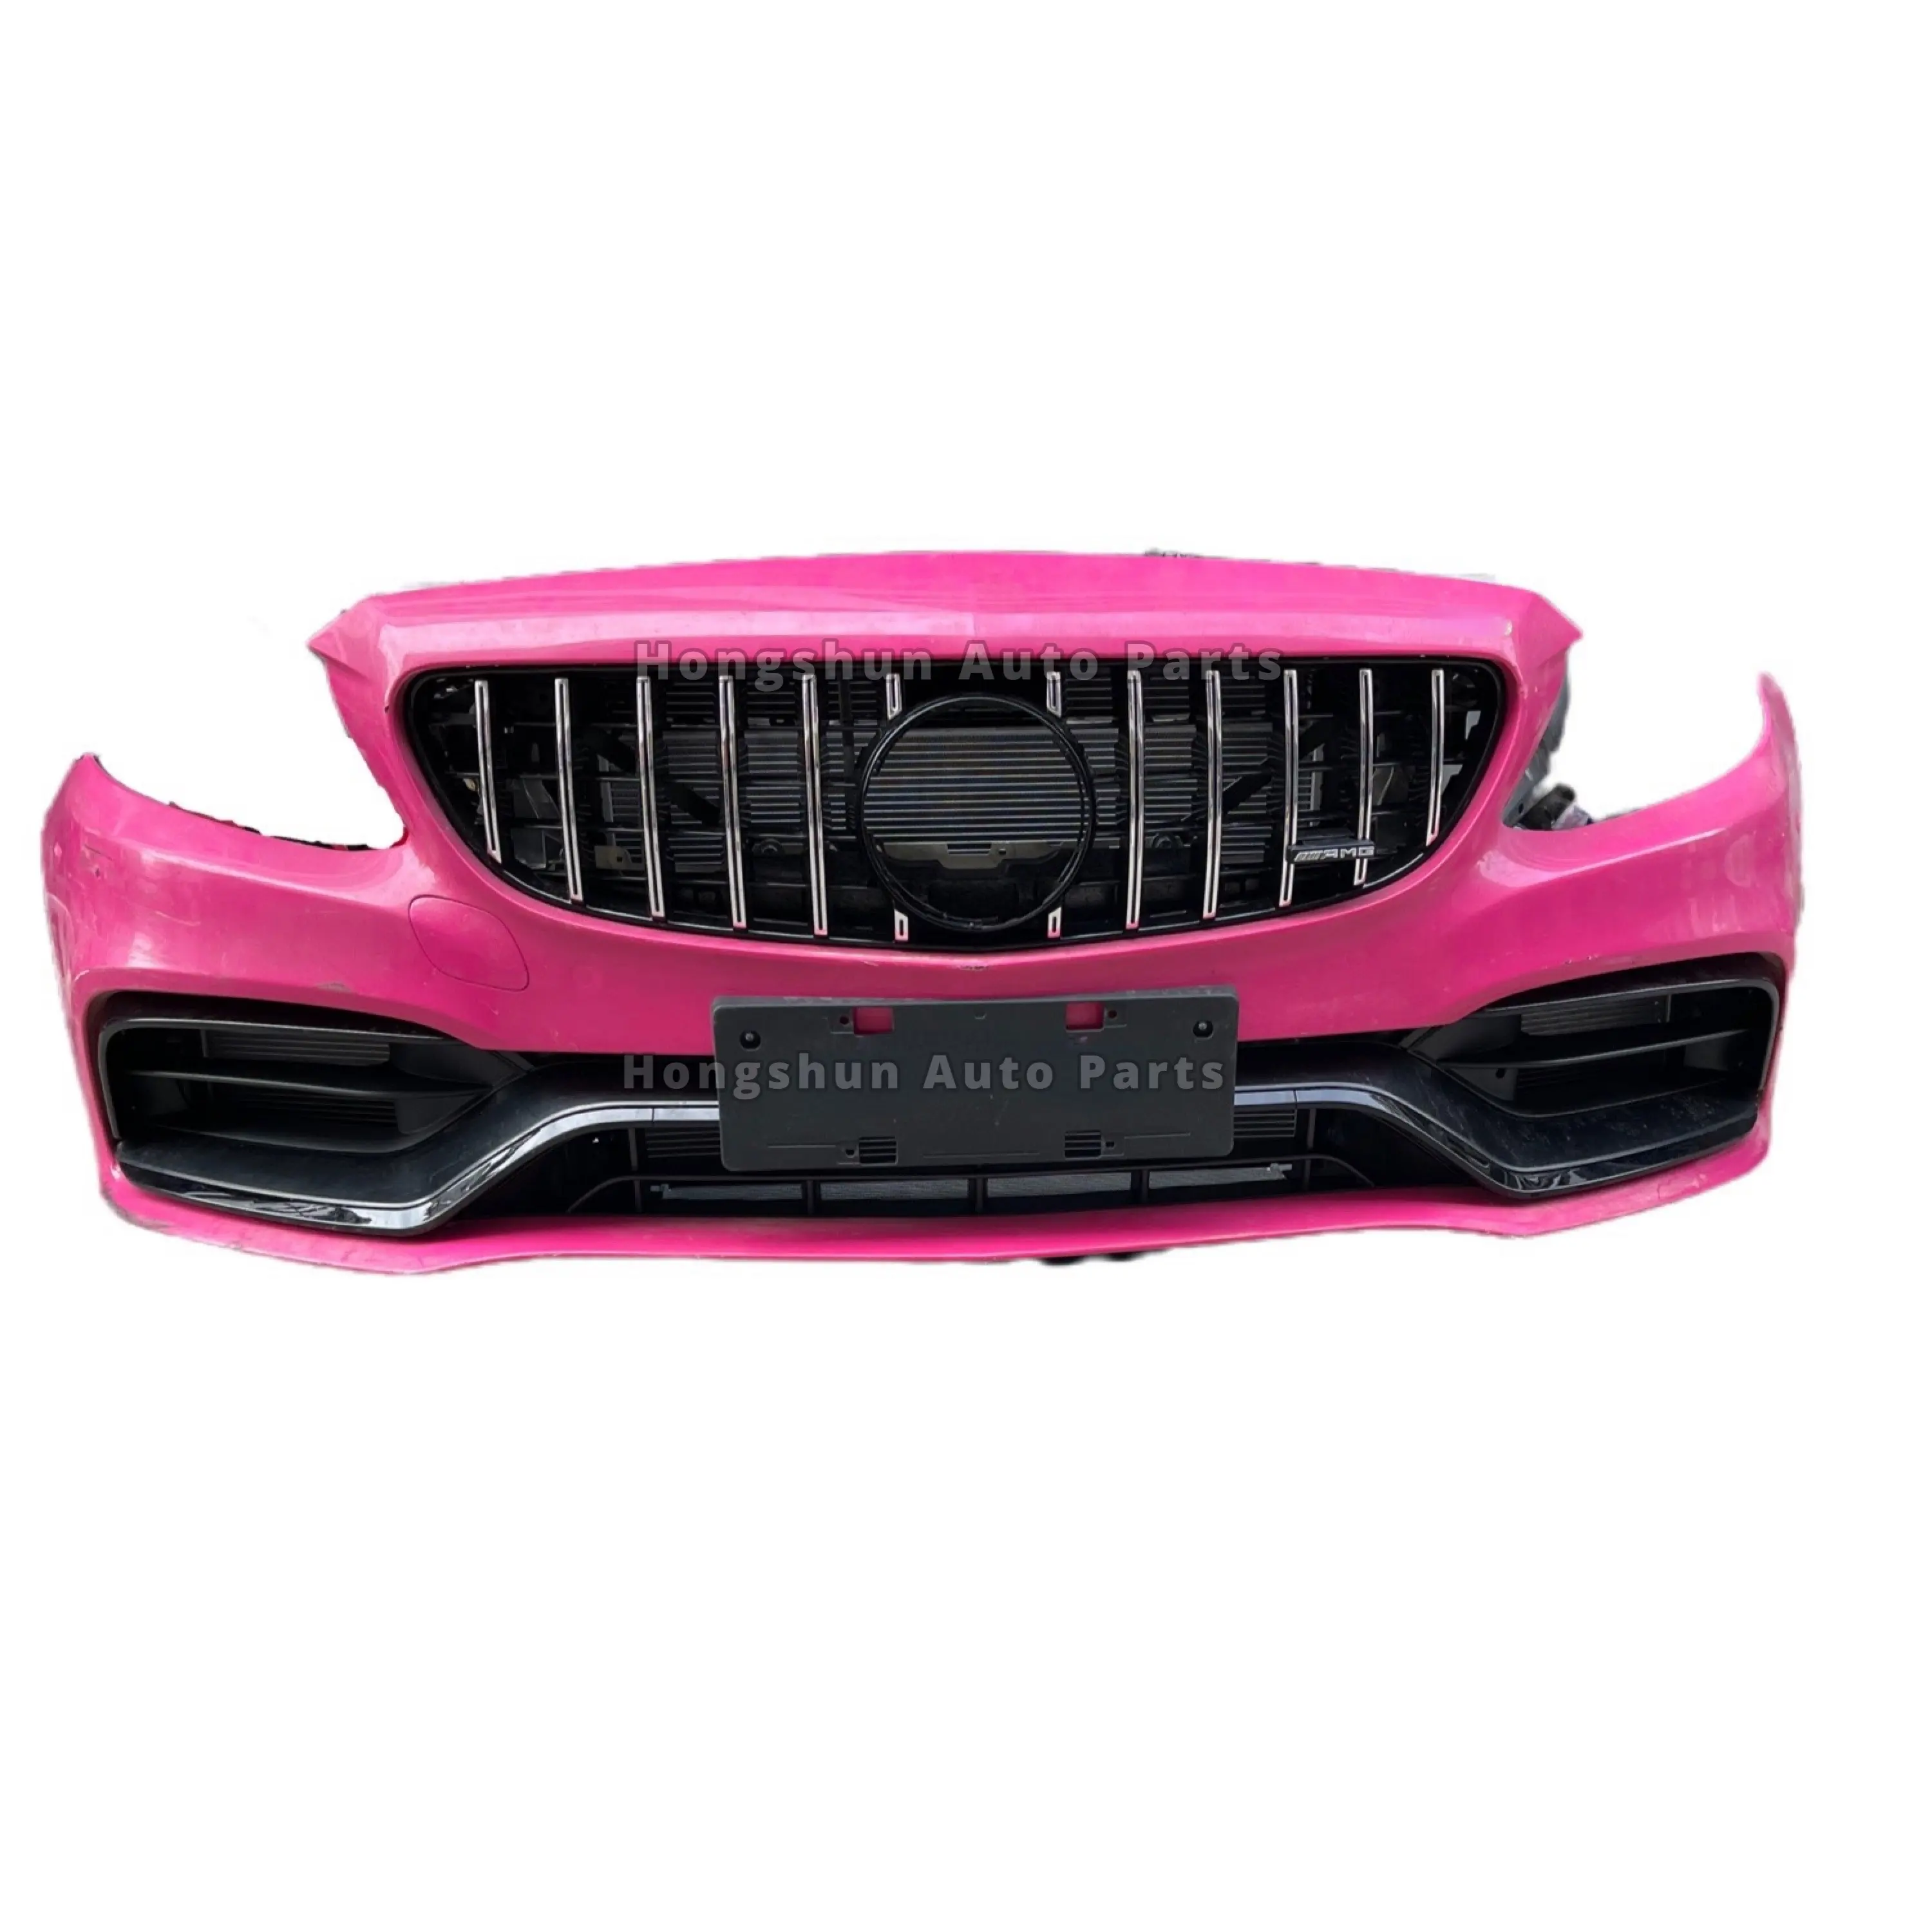 Original high quality 2012-2022 W205 C63 AMG front bumper body kit parts for Mercedes Benz